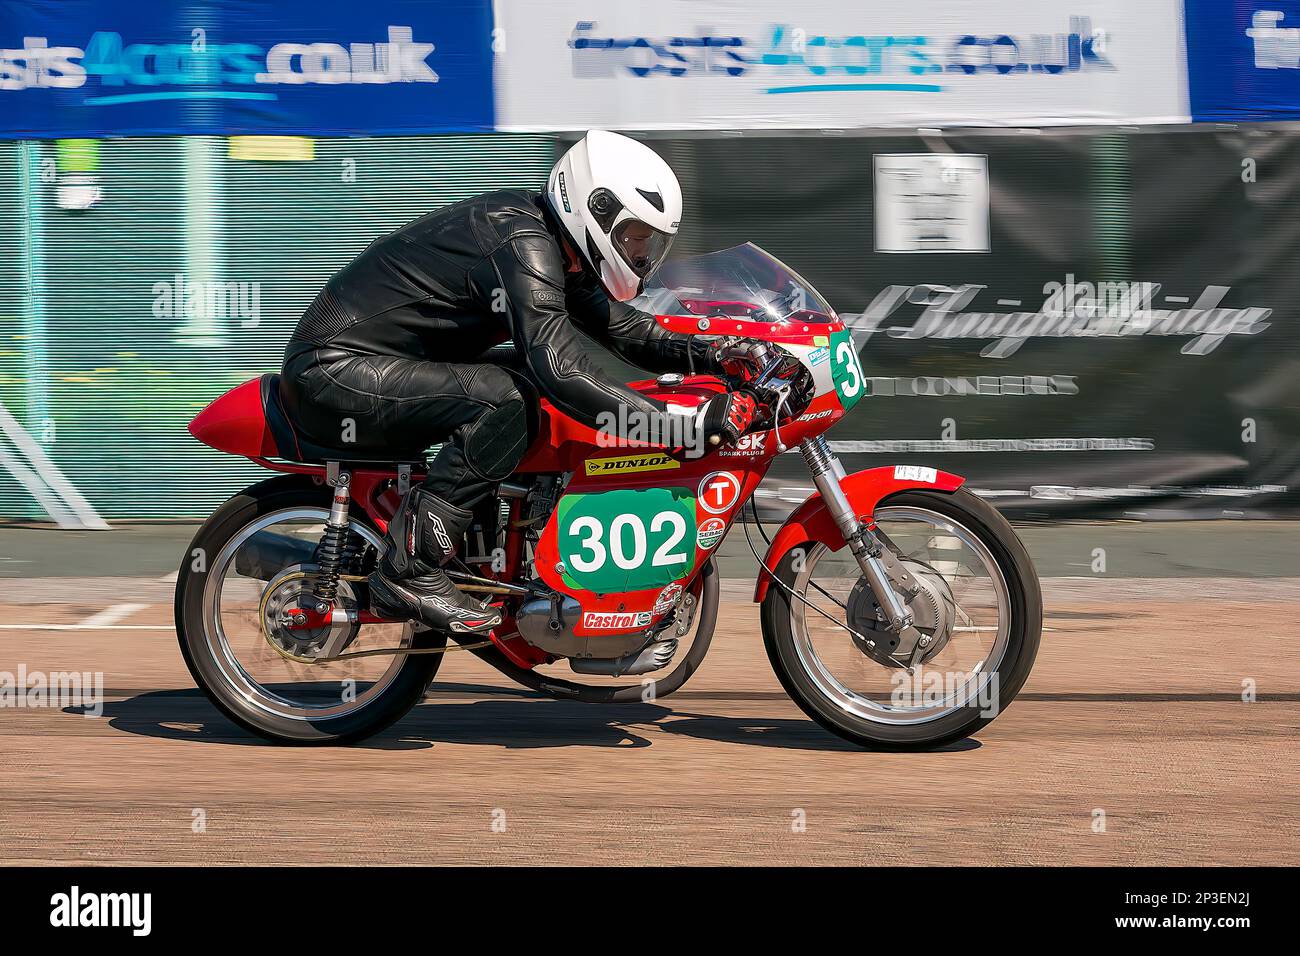 The event is currently run as a quarter mile sprint for both cars and motorcycles, held under the auspices of the Motor Sports Association. This image features Louie Allfrey riding a Ducati. The event is organised by the Brighton and Hove Motor Club run along Madeira Drive, Brighton Sea Front, City of Brighton & Hove, UK. 1st September 2018 Stock Photo